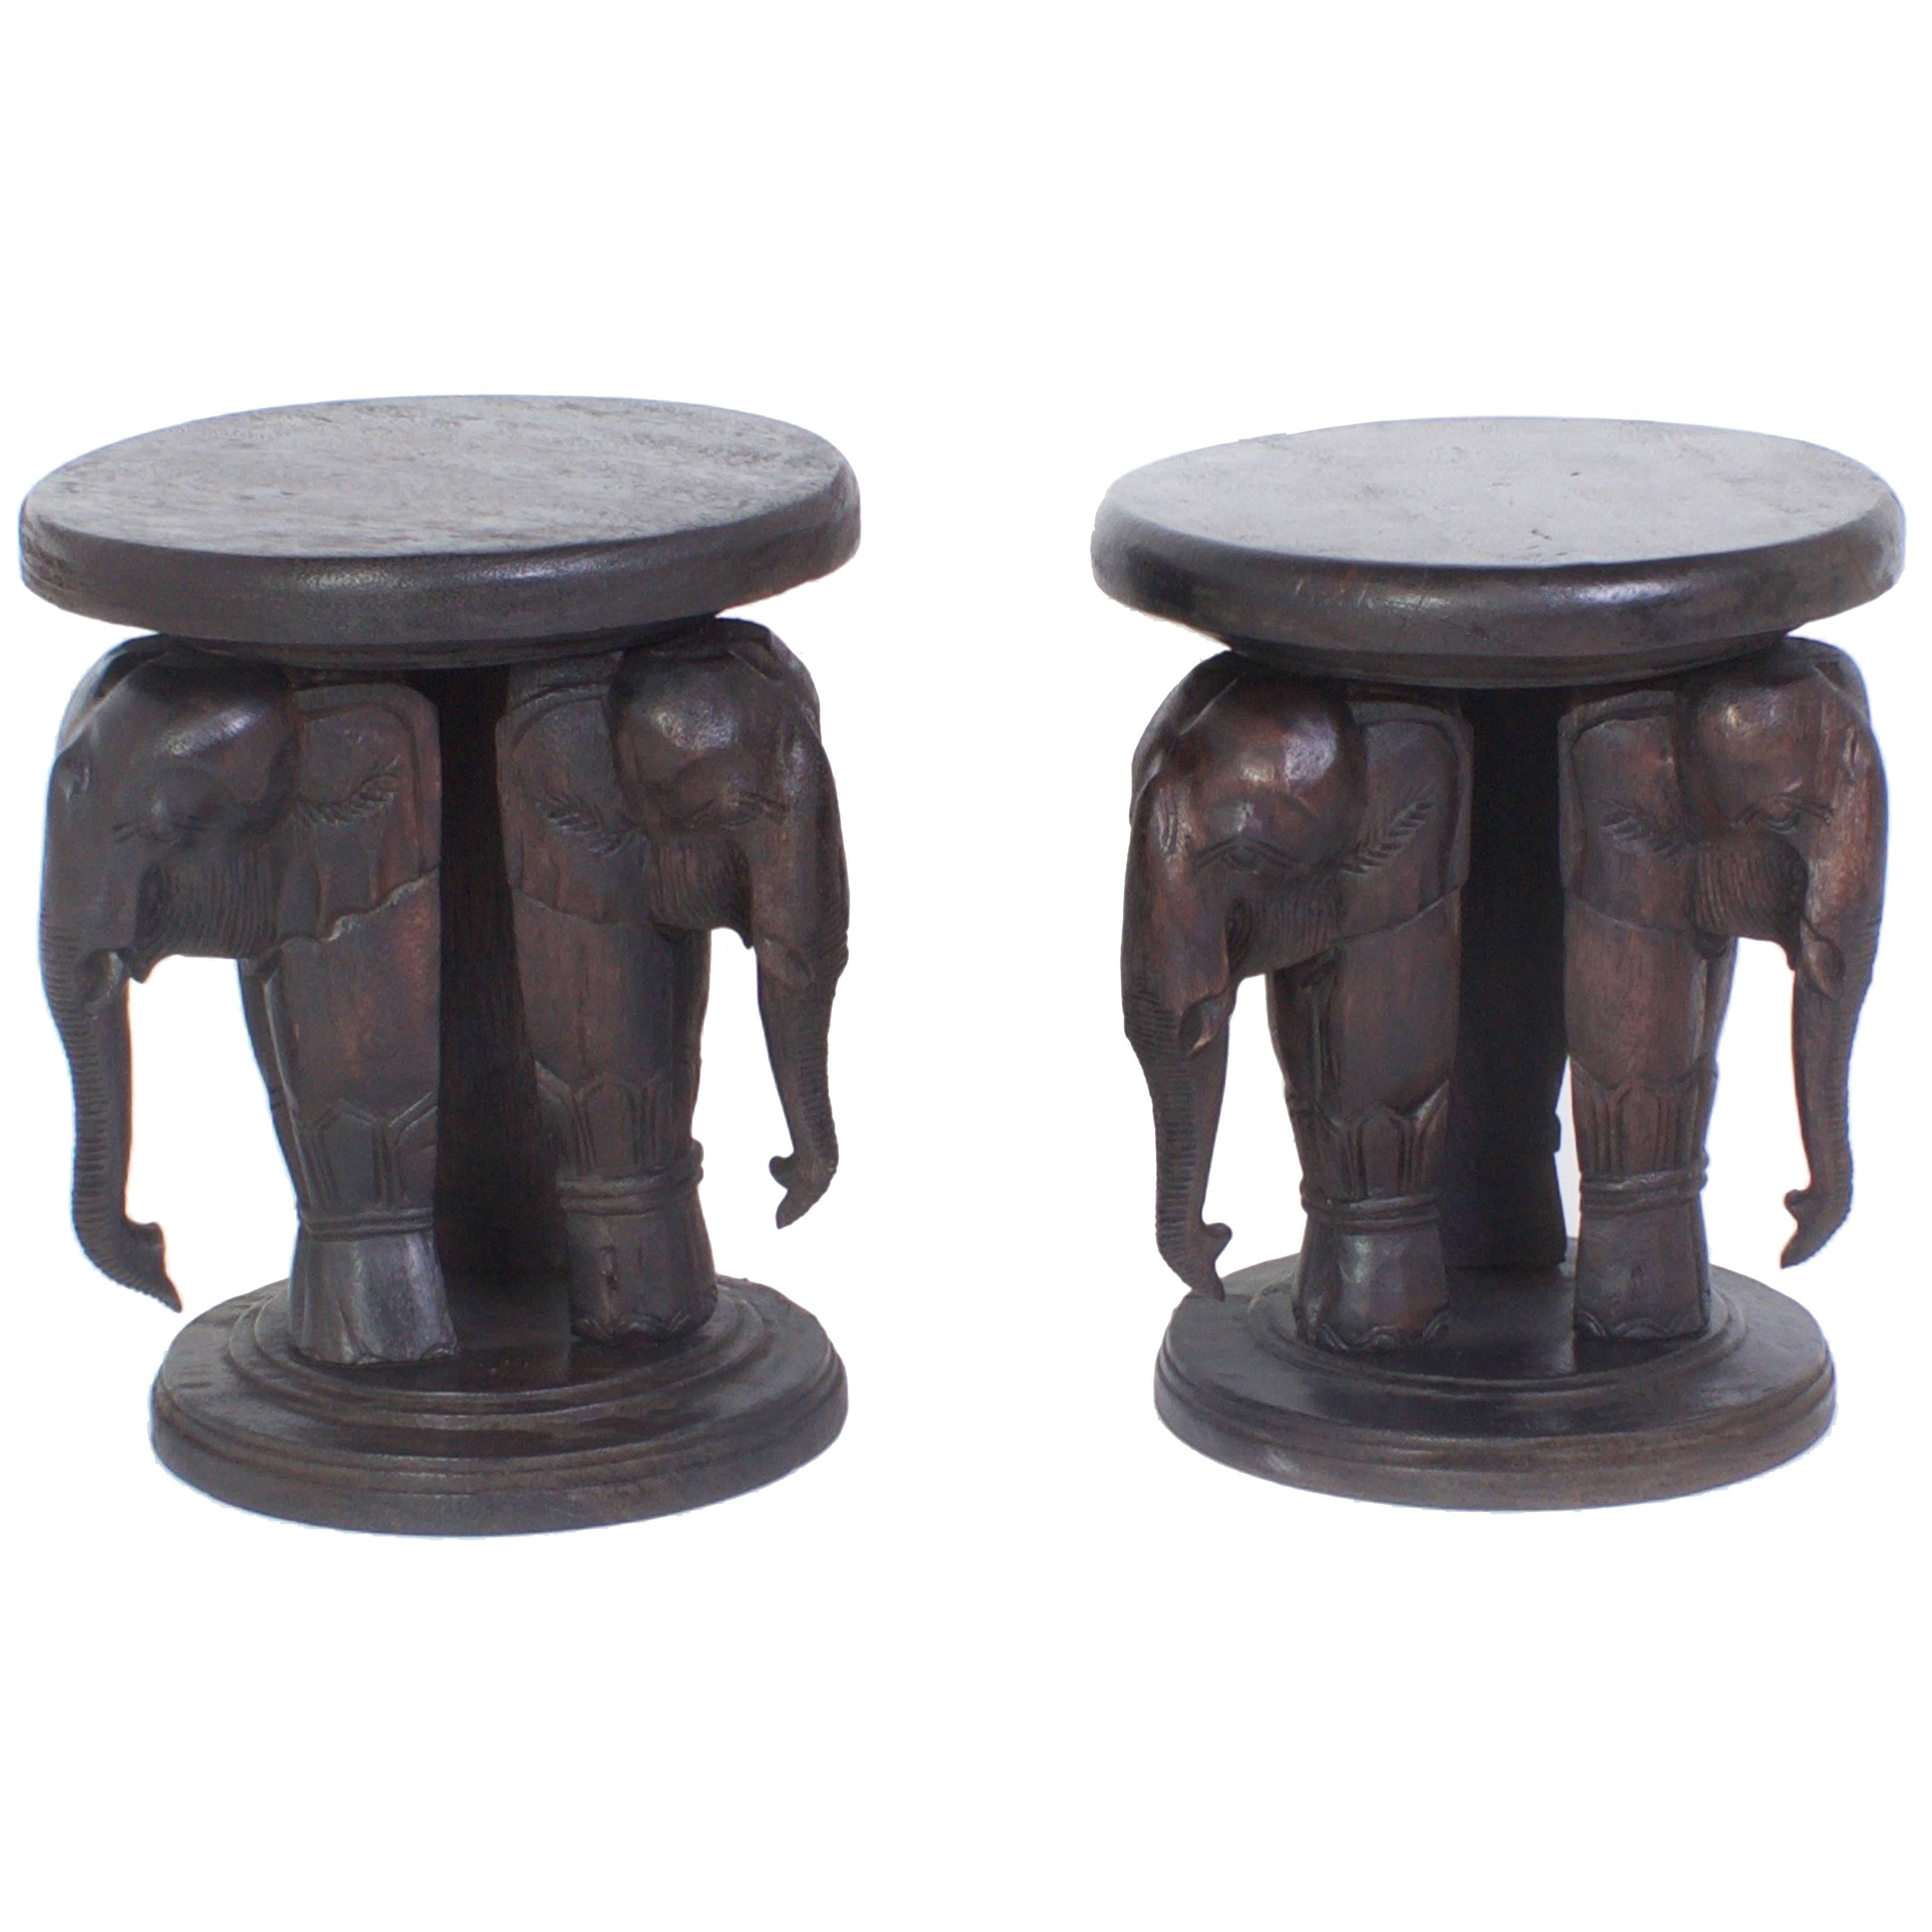 Pair of Elephant Tables, Carved Hardwood Anglo-Indian Style with a Folky Vibe